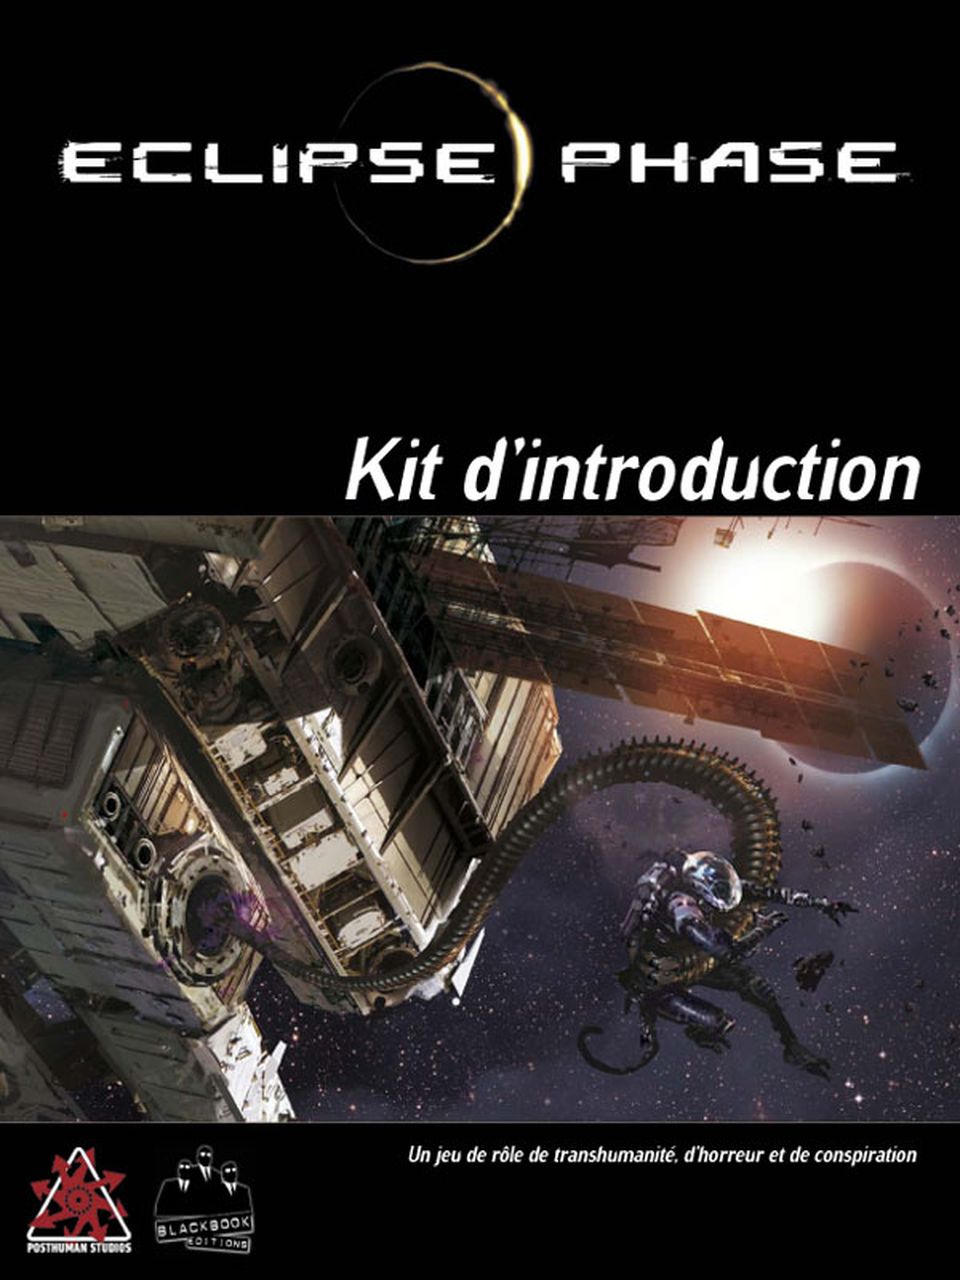 Eclipse Phase - Kit d'introduction image